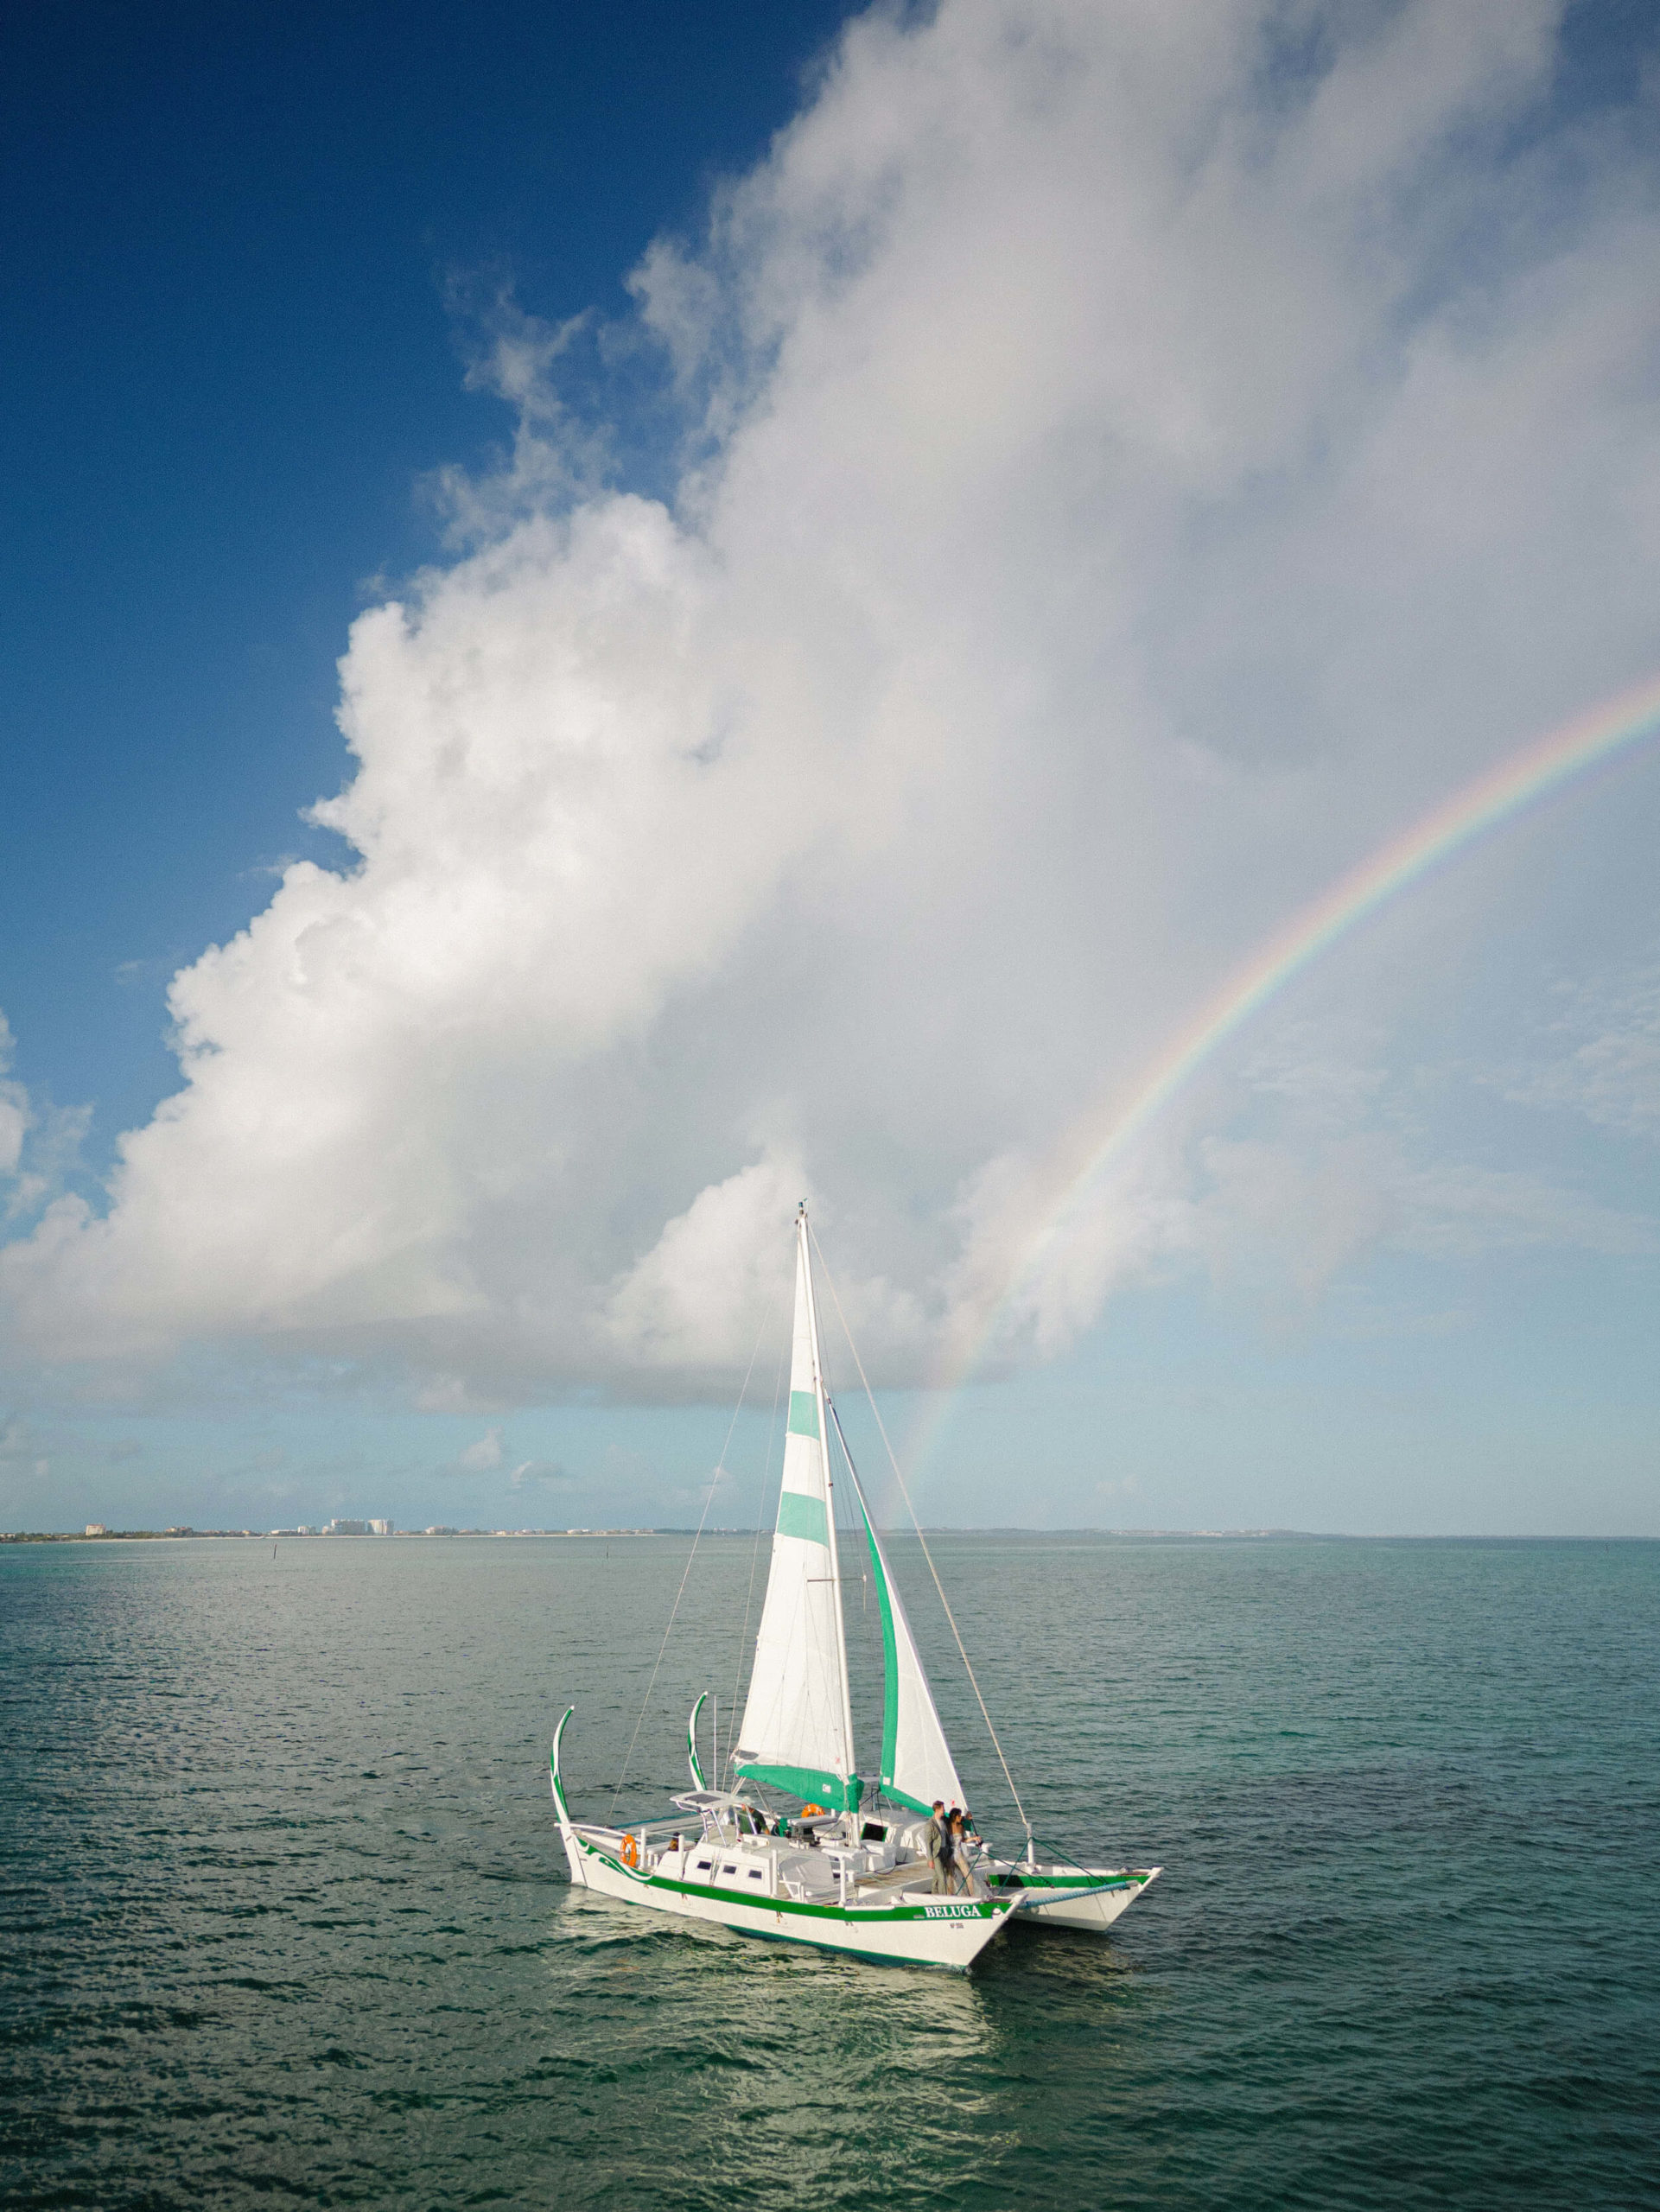 A rainbow over a boat on the water